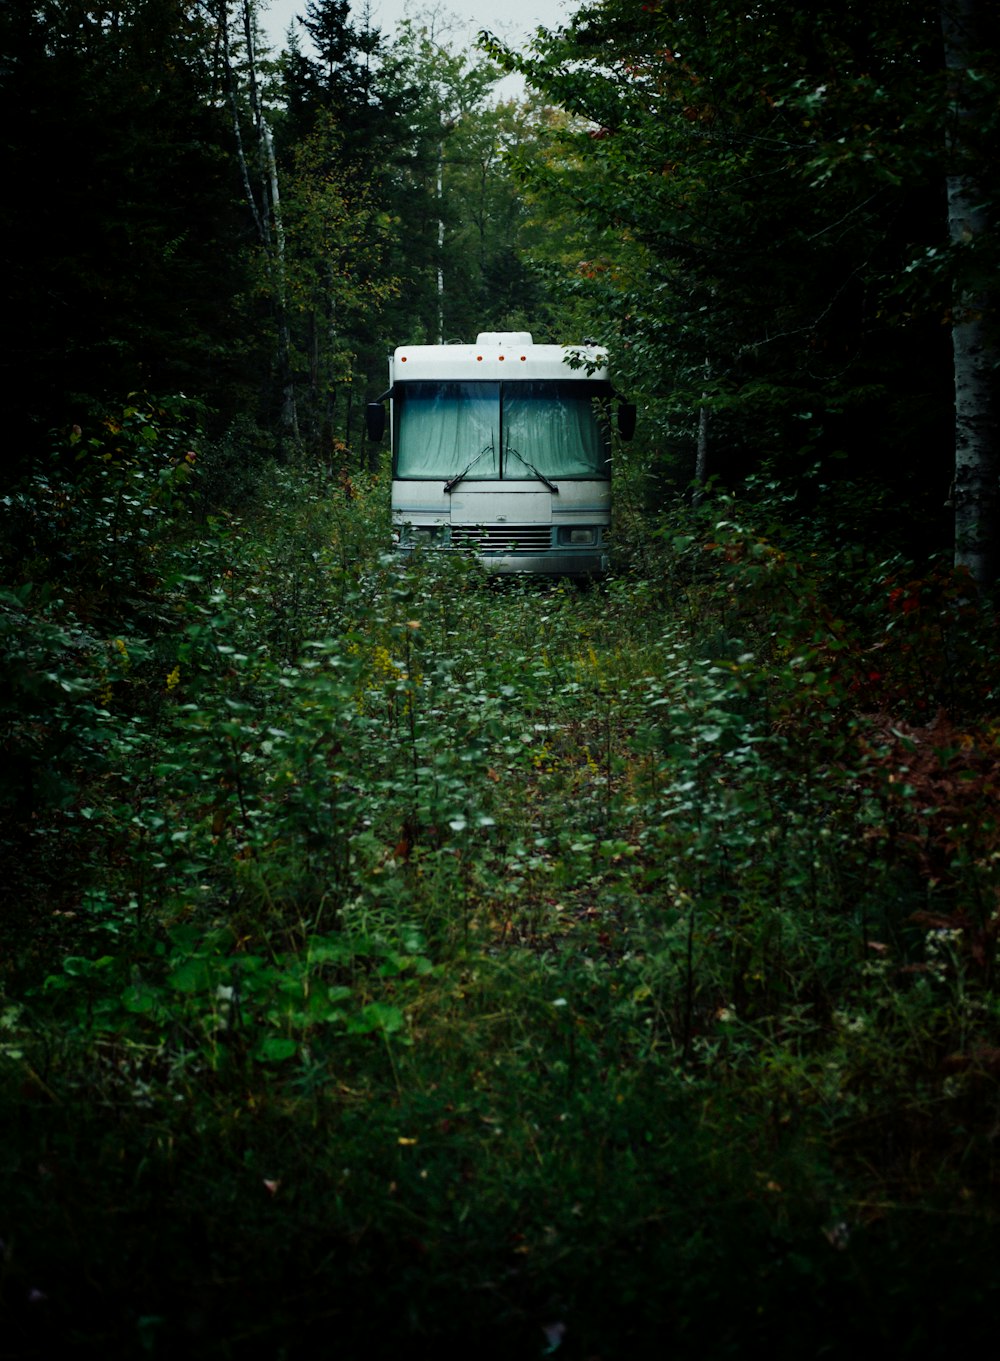 white bus surrounded by trees